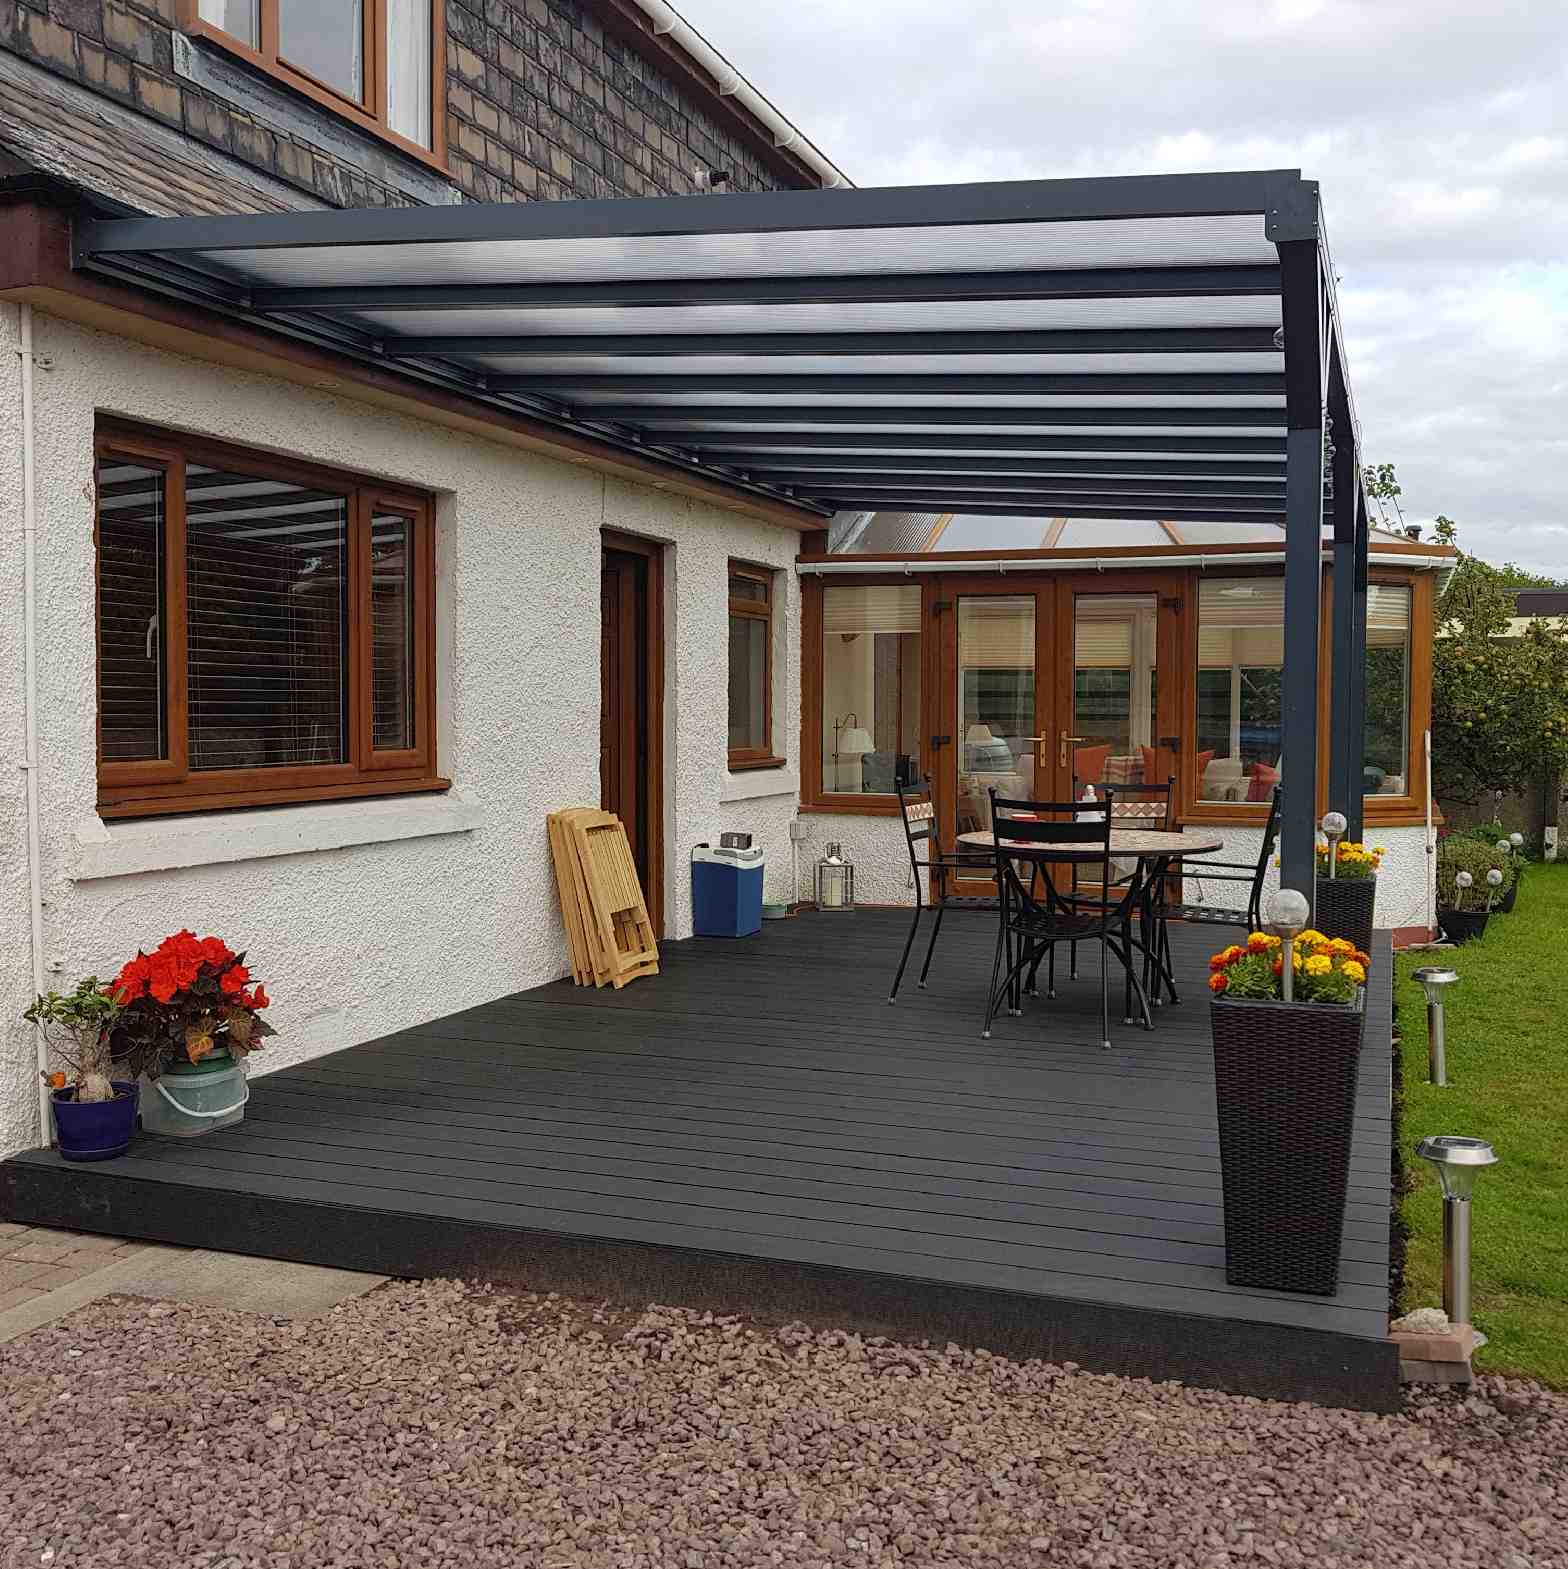 Buy Omega Verandah, Anthracite Grey, 16mm Polycarbonate Glazing - 4.2m (W) x 3.0m (P), (3) Supporting Posts online today